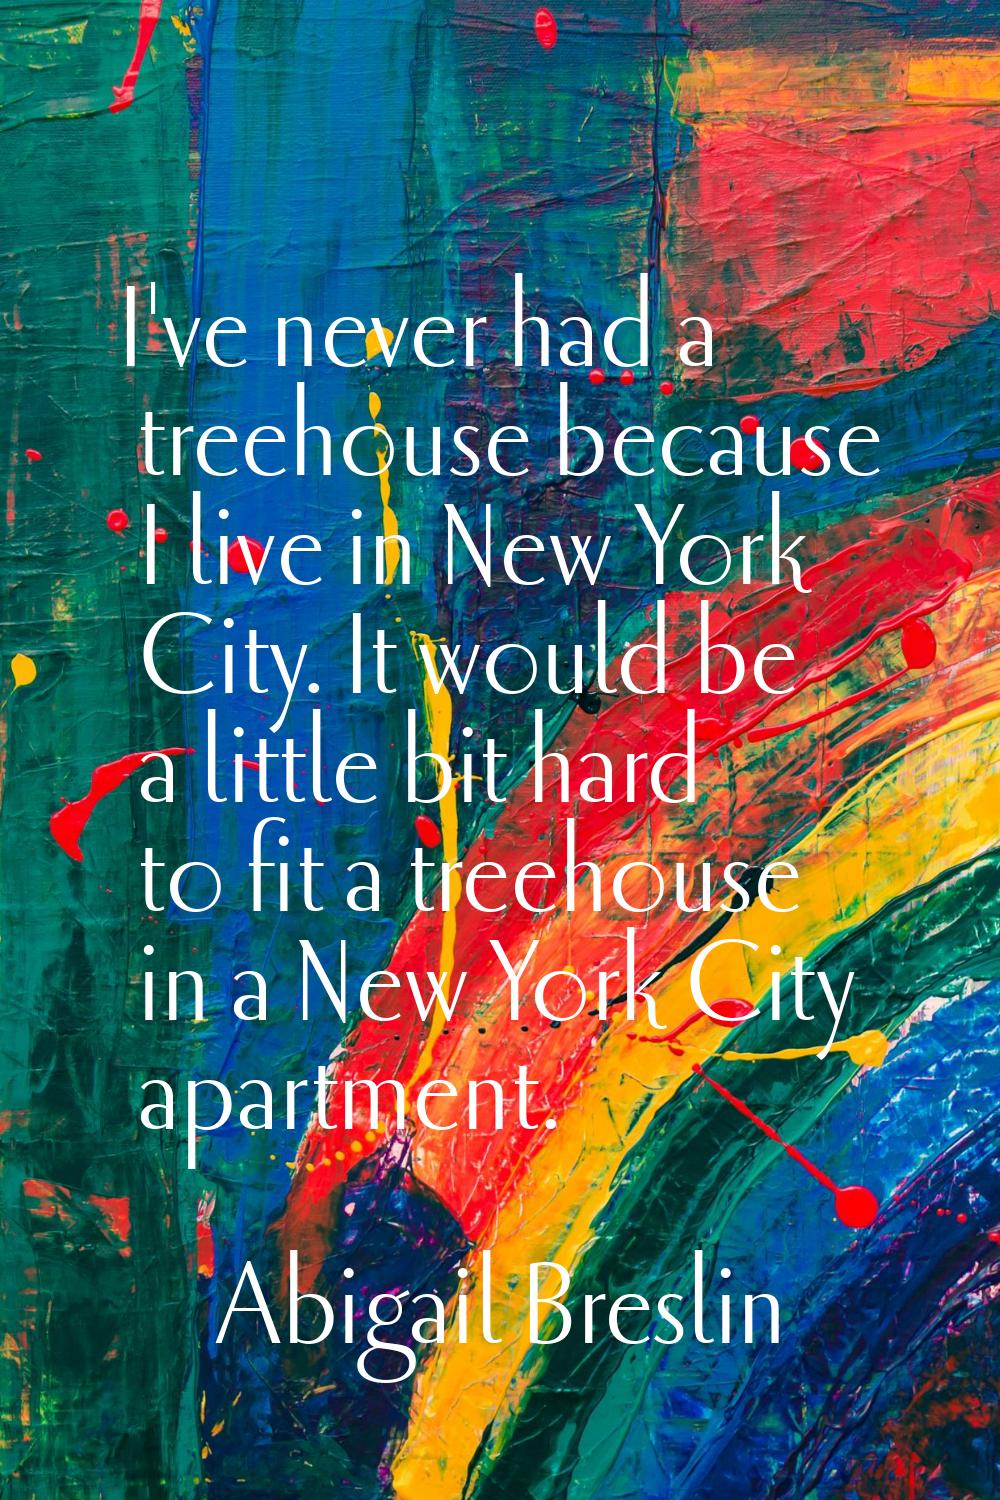 I've never had a treehouse because I live in New York City. It would be a little bit hard to fit a 